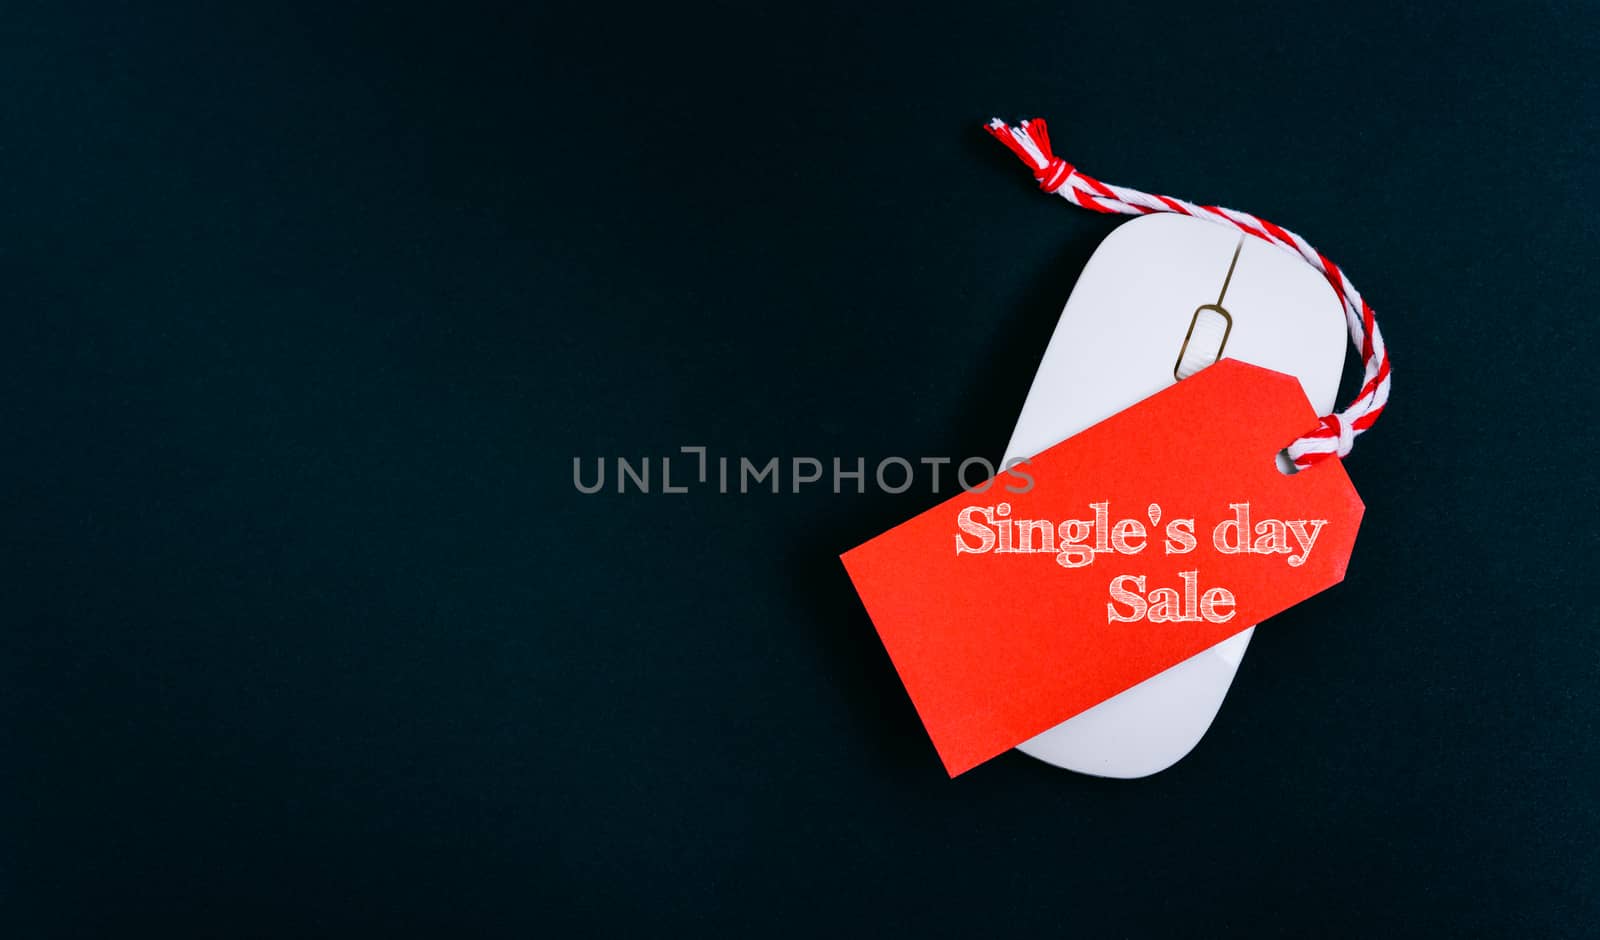 Online shopping Single's day sale text red tag on computer mouse by Sorapop